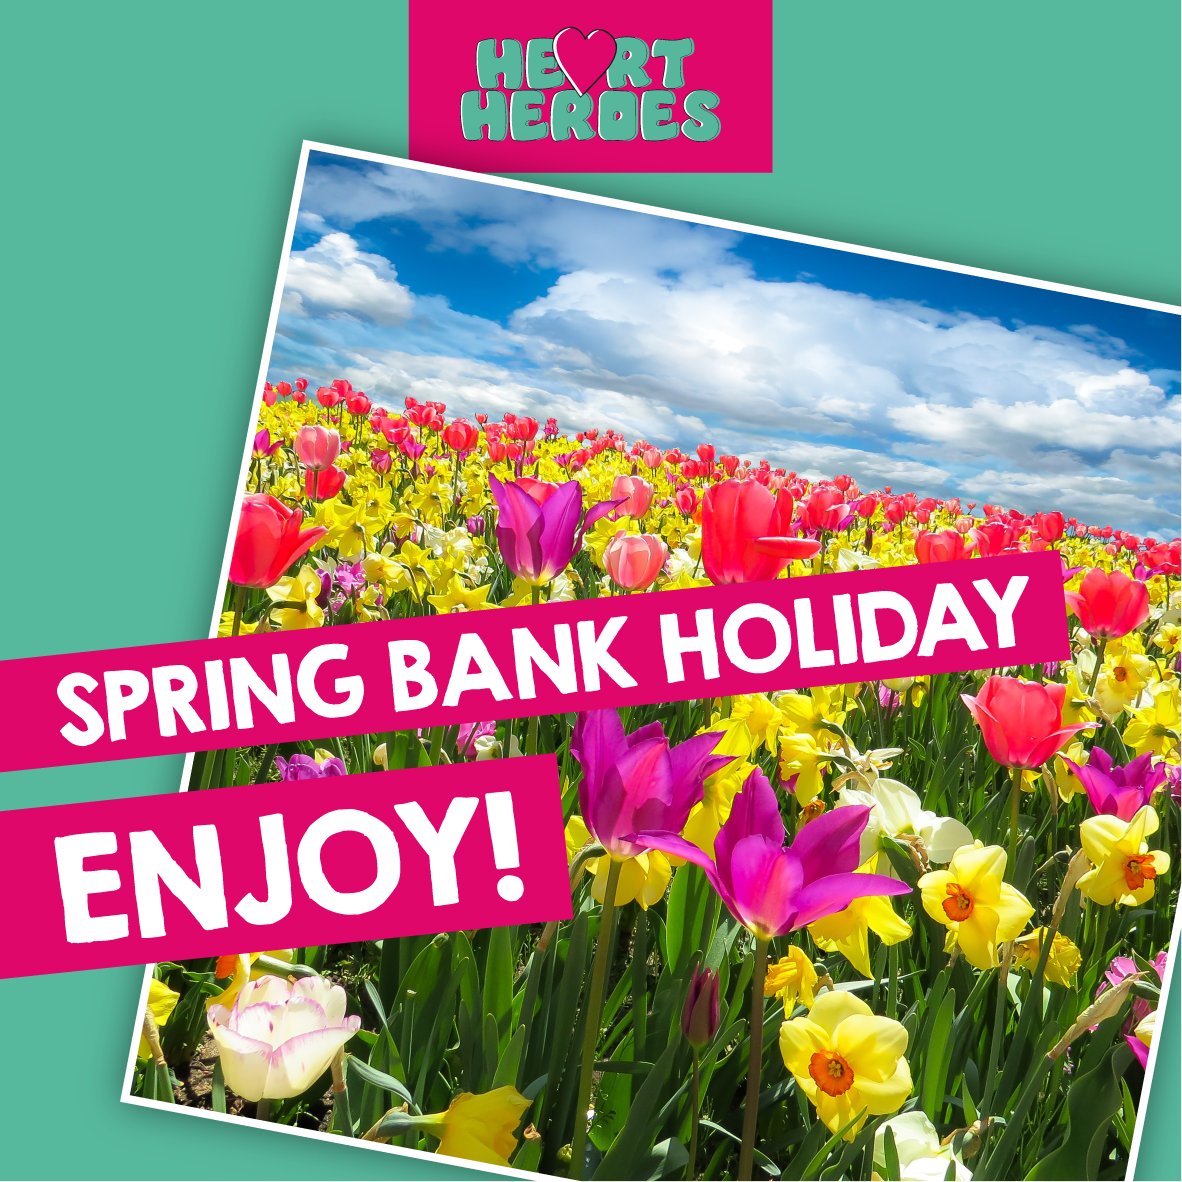 What are you doing this bank holiday? Whatever you get up to, we hope you have a great day! #springbankholiday #enjoyyourday